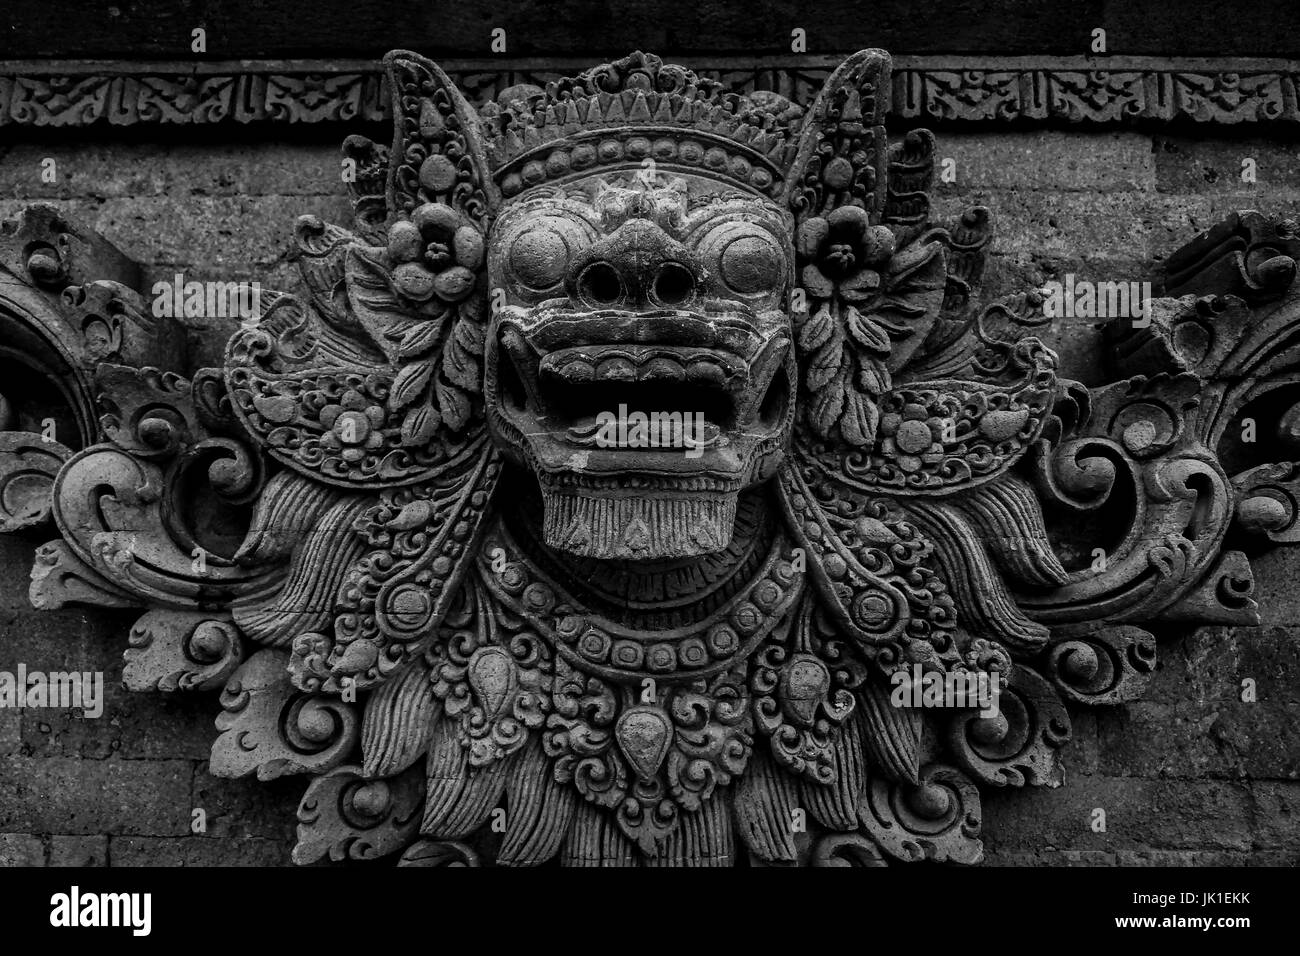 Bali Black and White Stock Photos & Images - Alamy